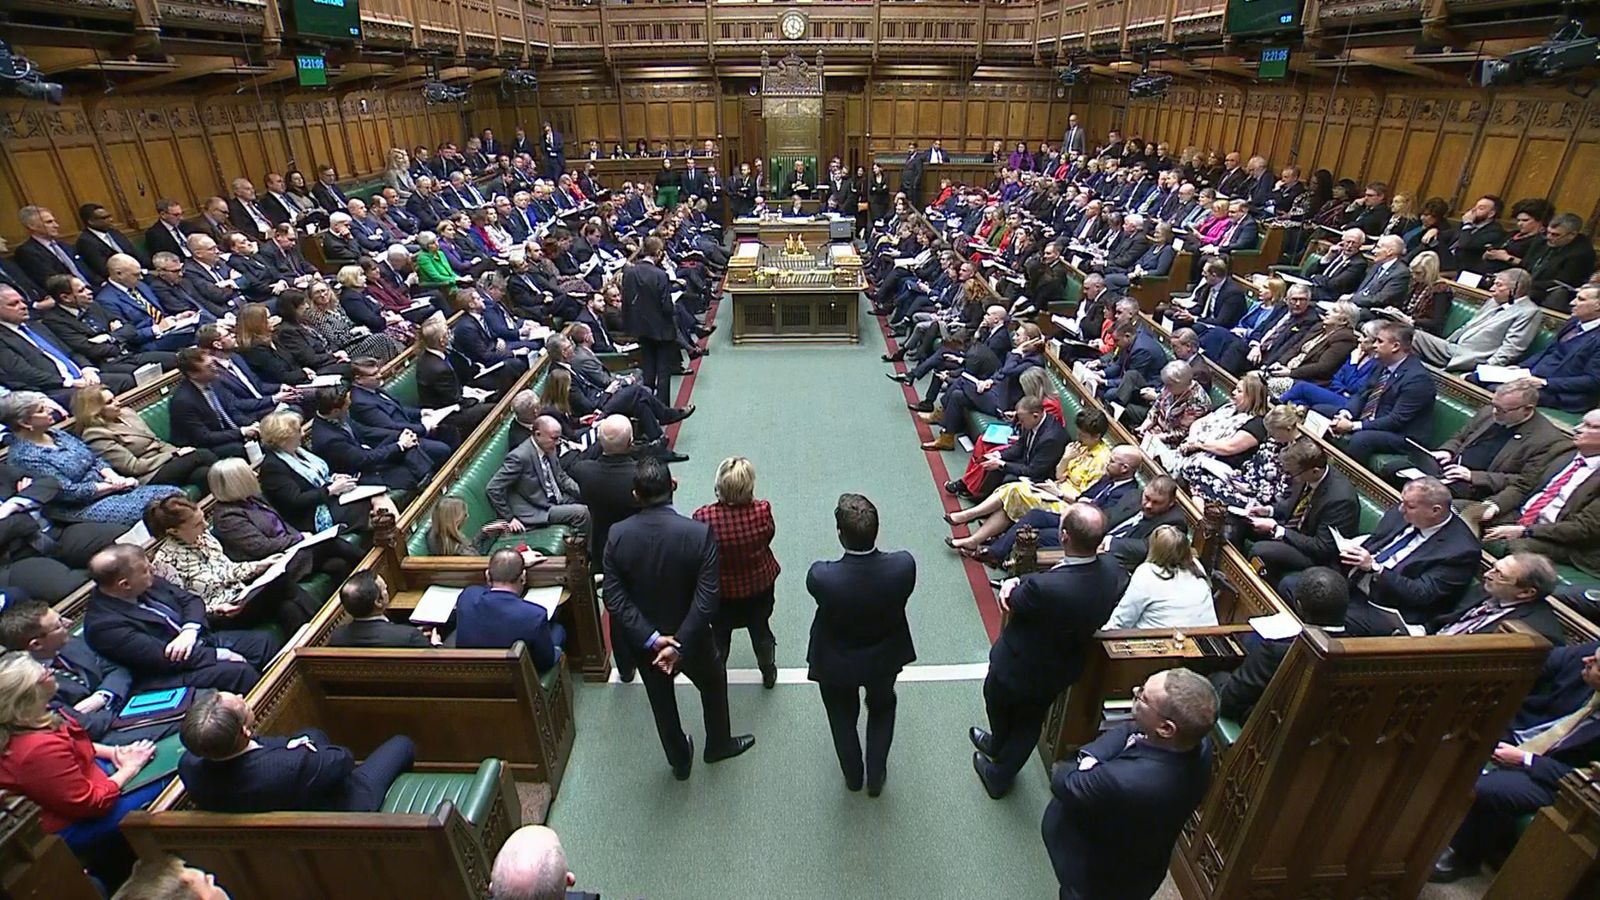 £31m package unveiled to increase security for mps